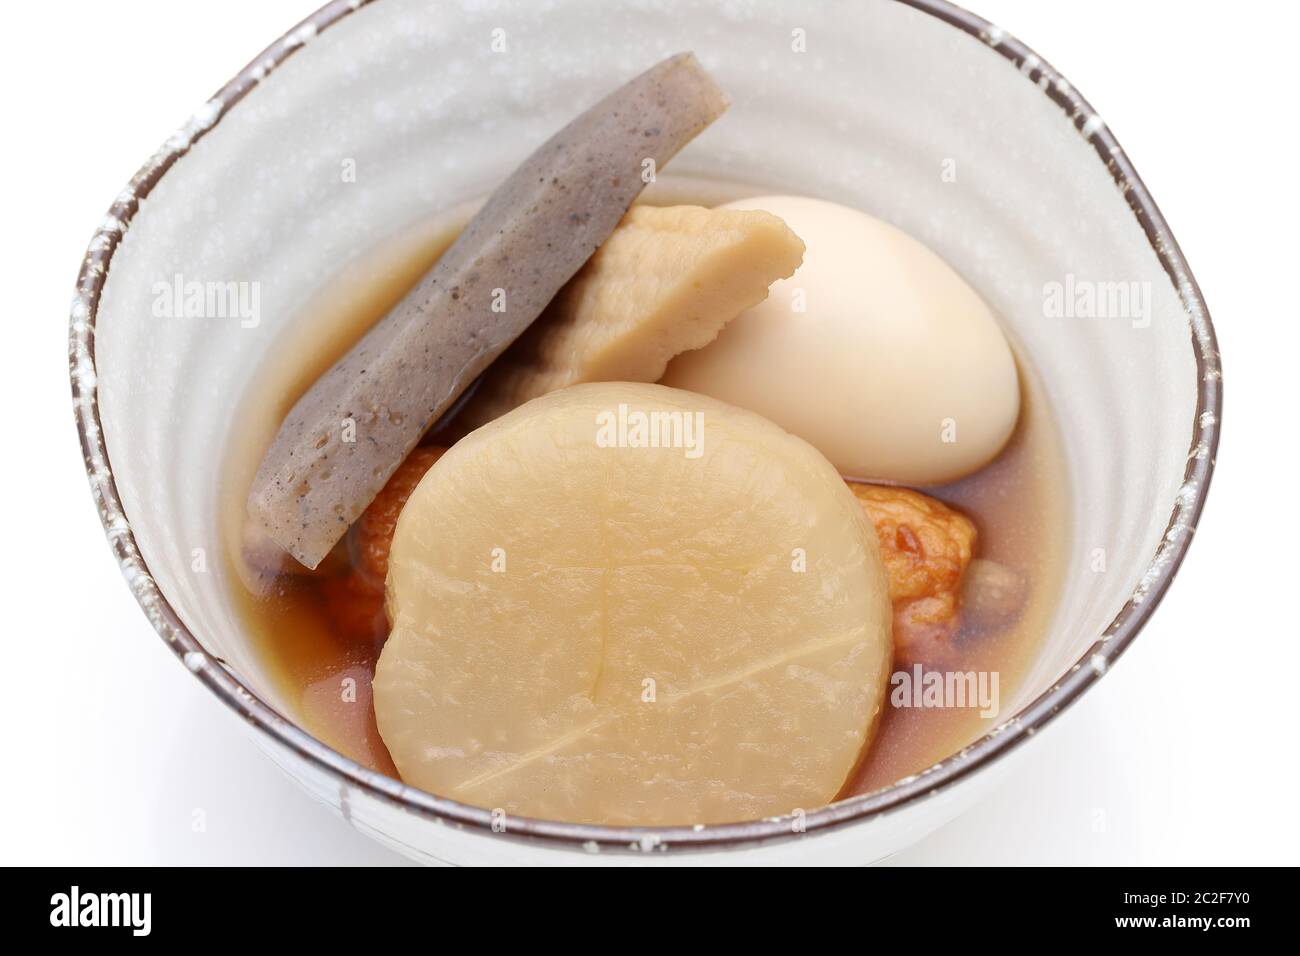 https://c8.alamy.com/comp/2C2F7Y0/japanese-food-oden-in-a-bowl-on-white-background-2C2F7Y0.jpg